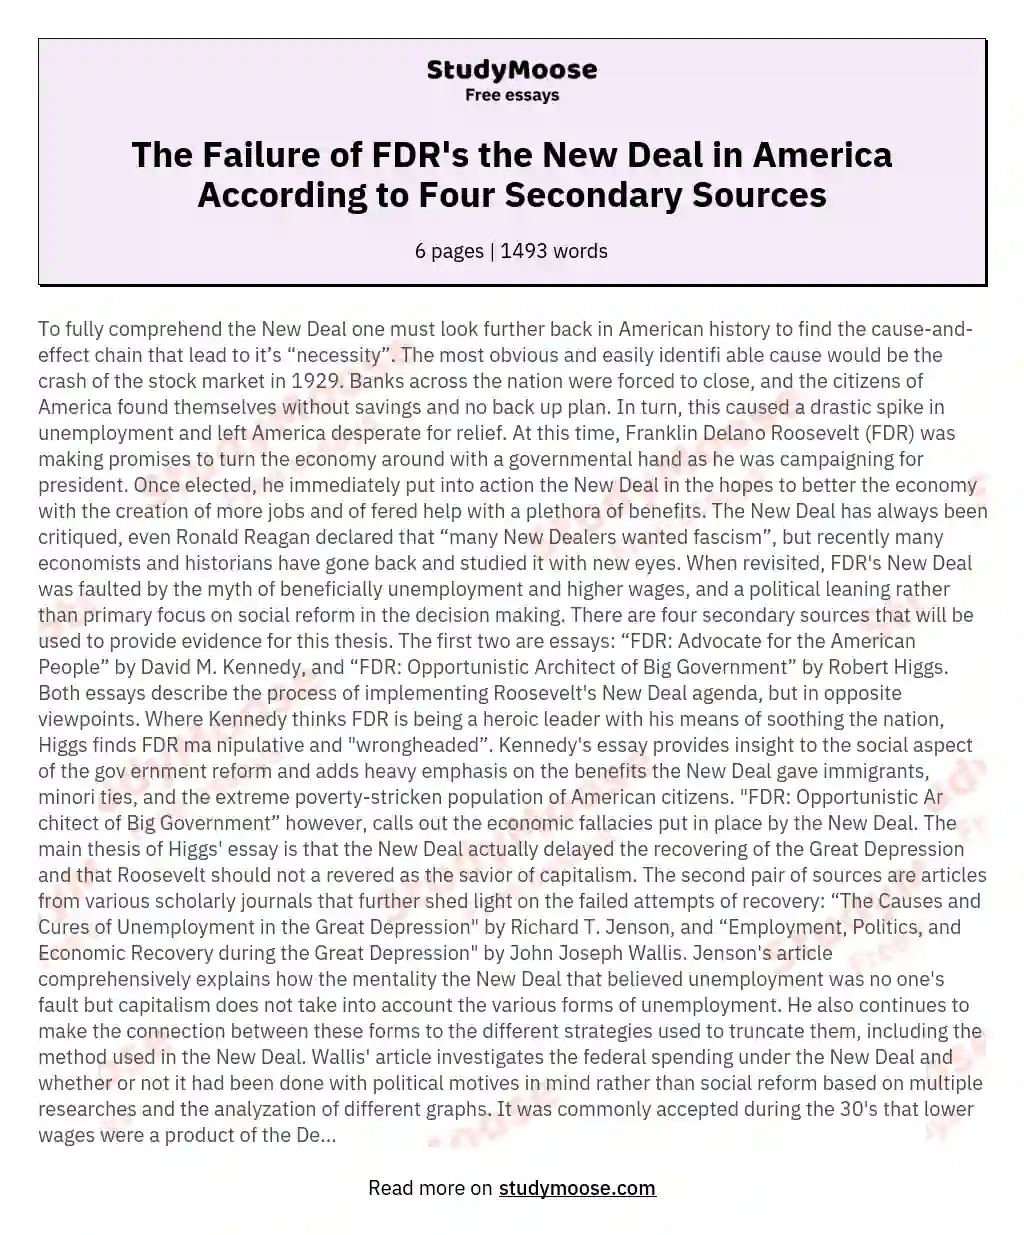 The Failure of FDR's the New Deal in America According to Four Secondary Sources essay